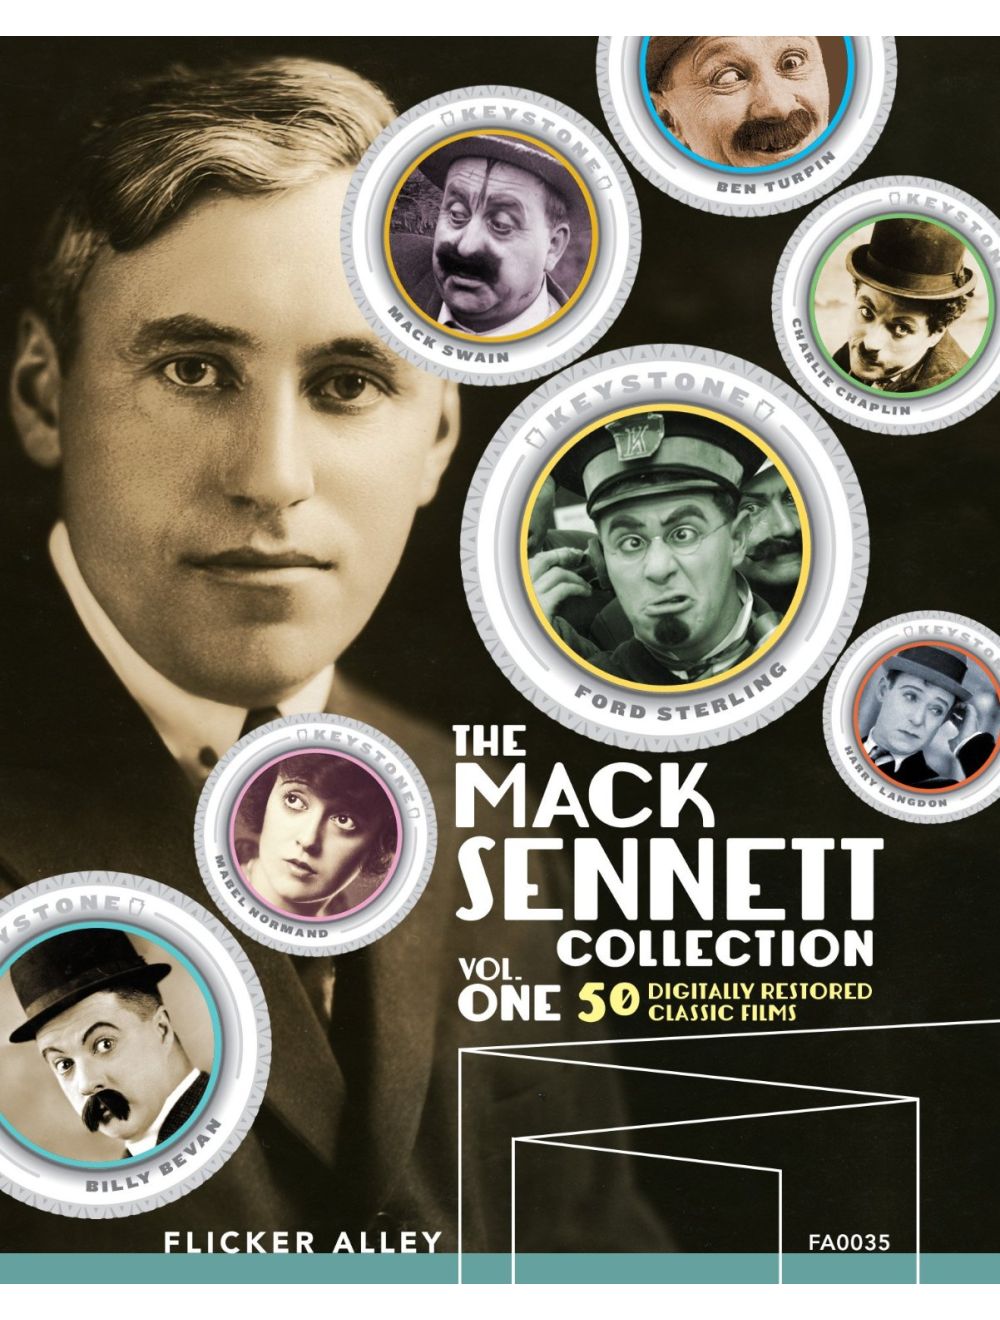 The Mack Sennett Collection Vol One On Blu Ray Loving The Classics